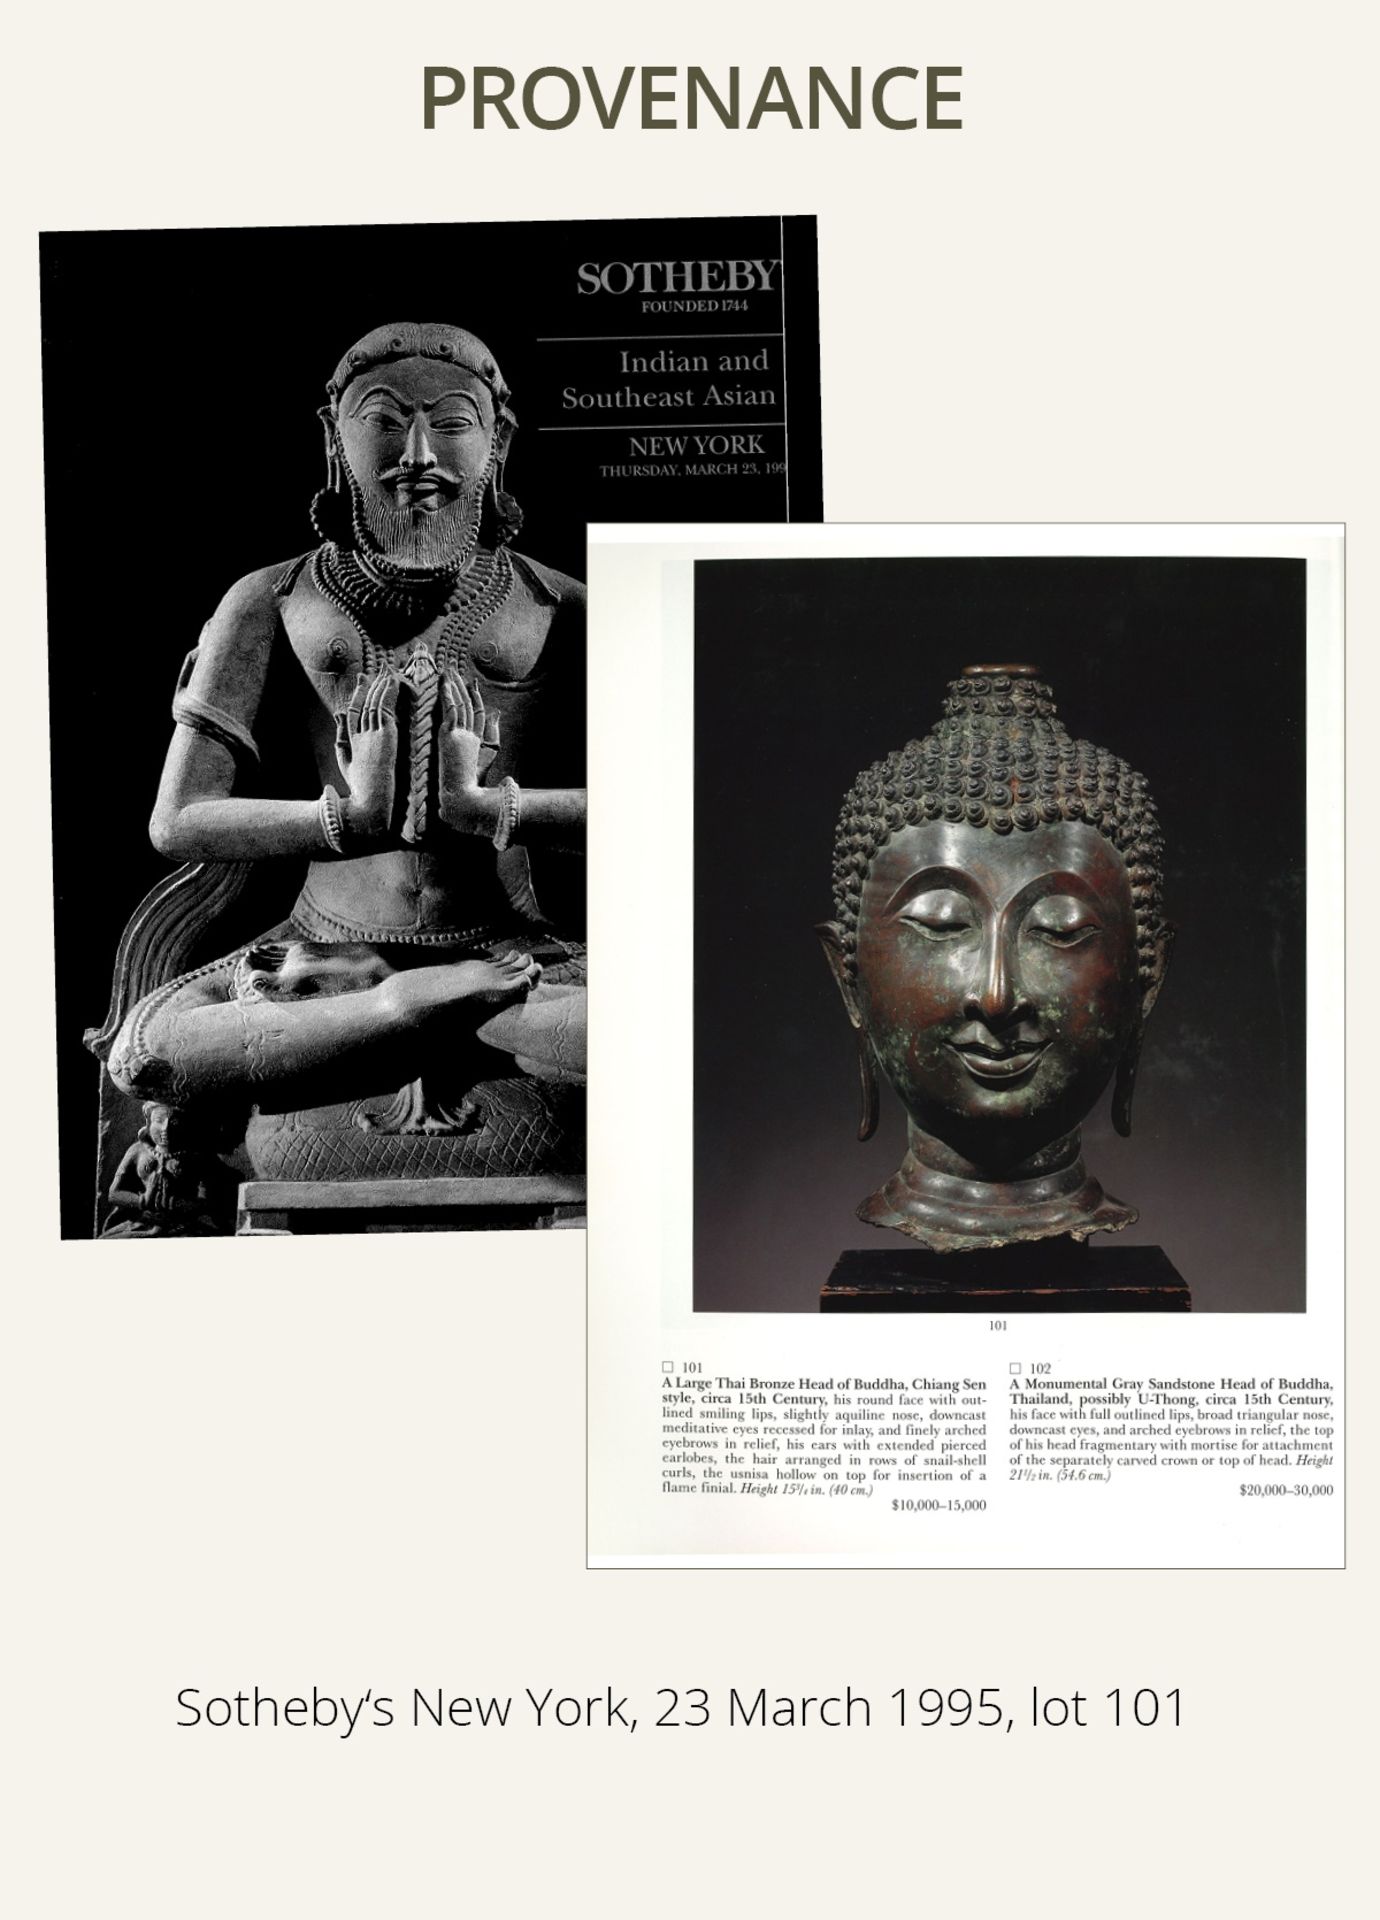 A MONUMENTAL BRONZE HEAD OF BUDDHA, LAN NA, NORTHERN THAILAND, 14TH-15th CENTURY - Image 4 of 16